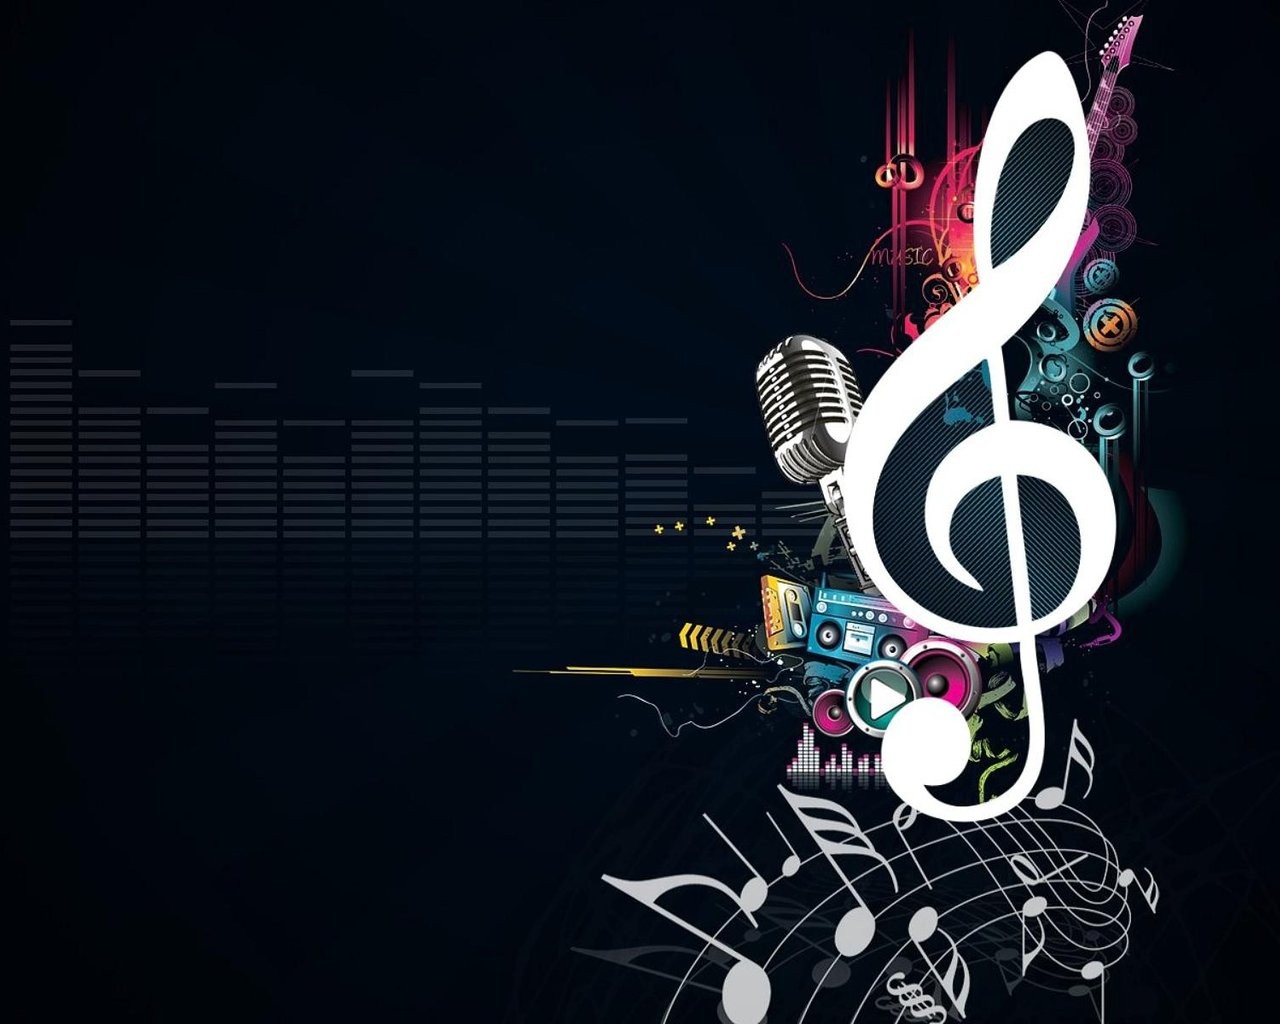 Cool Music Backgrounds 8332 Hd Wallpapers in Music   Imagescicom